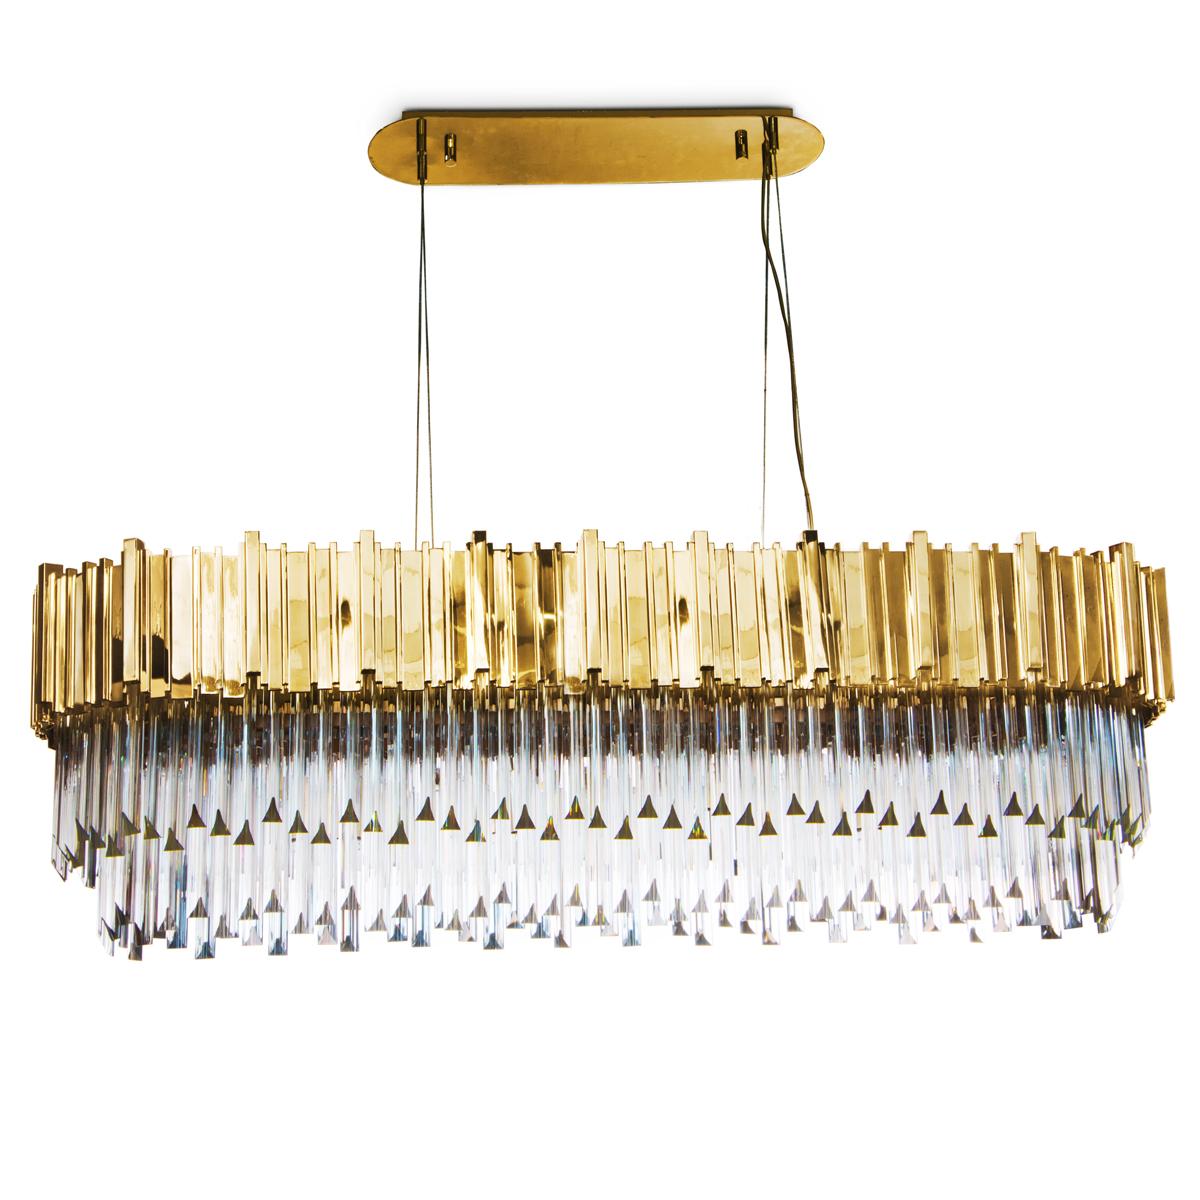 Chandelier ambassador long oval with crystal glass
pendants. With a big long oval ring of gold-plated polished
brass with rectangular sticks. With 20 bulbs, lamp holder
type G9. 20 Watt max, for 220-240V. Bulbs not included.
With steel ropes for